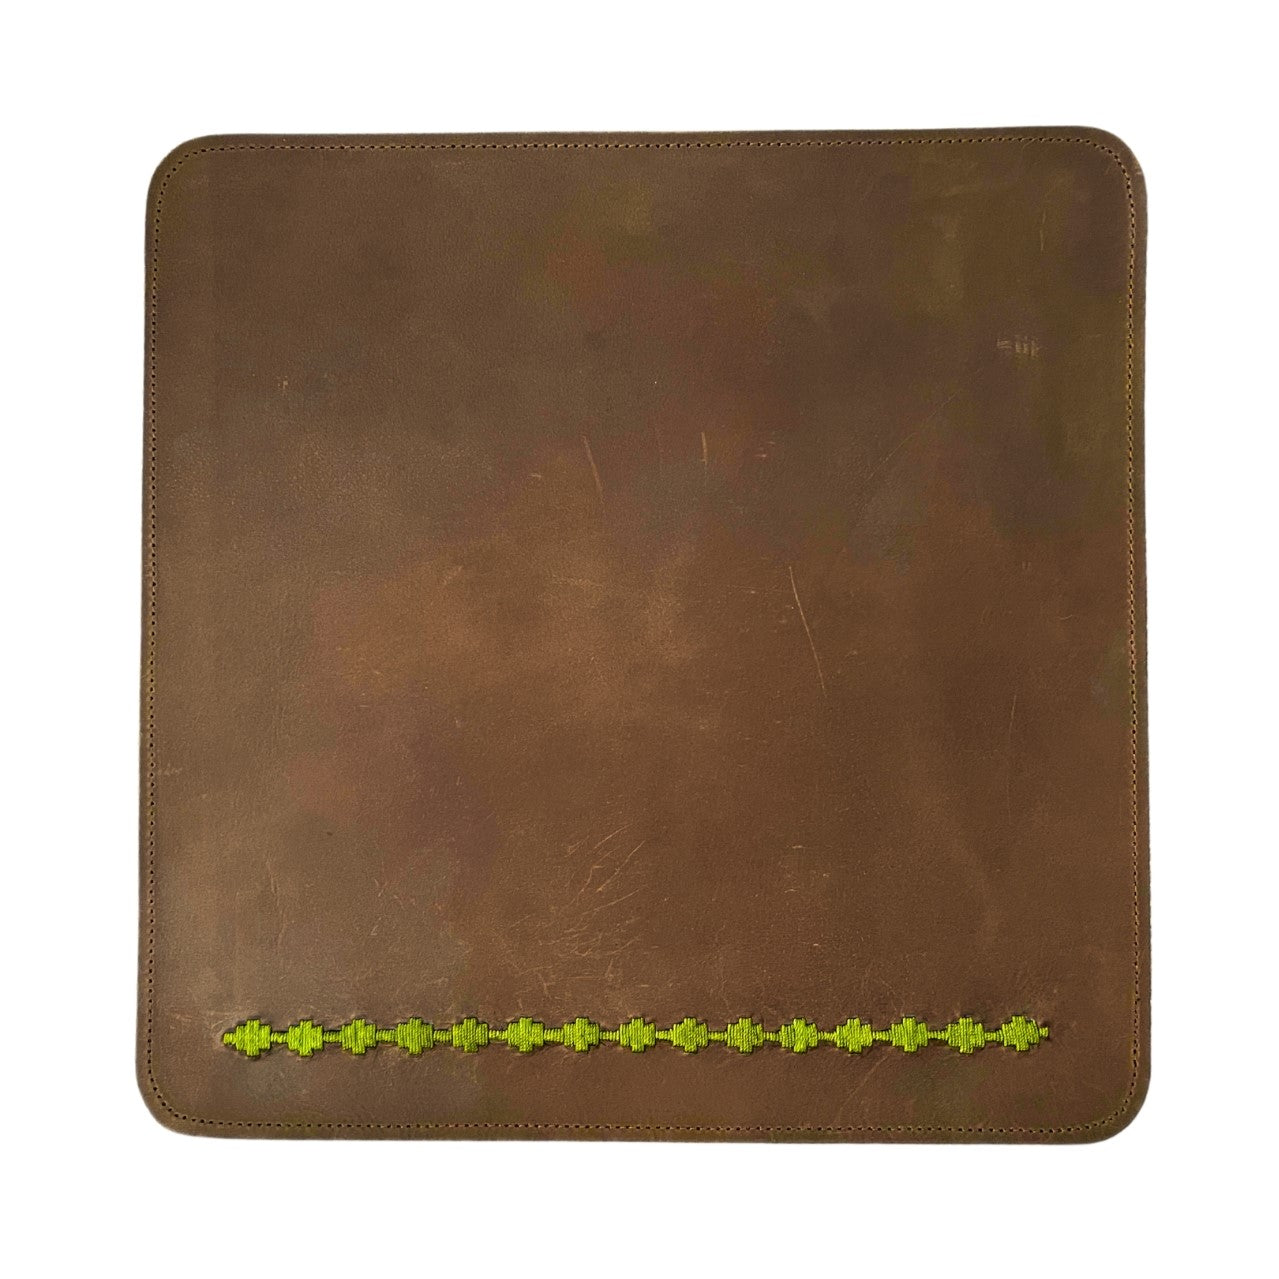 A worn brown buffalo leather dinner mat with visible scratches and distress marks. The mat has rounded corners and is stitched with a contrasting light thread. A decorative row of small, embossed green shamrocks from Georgie Paws.